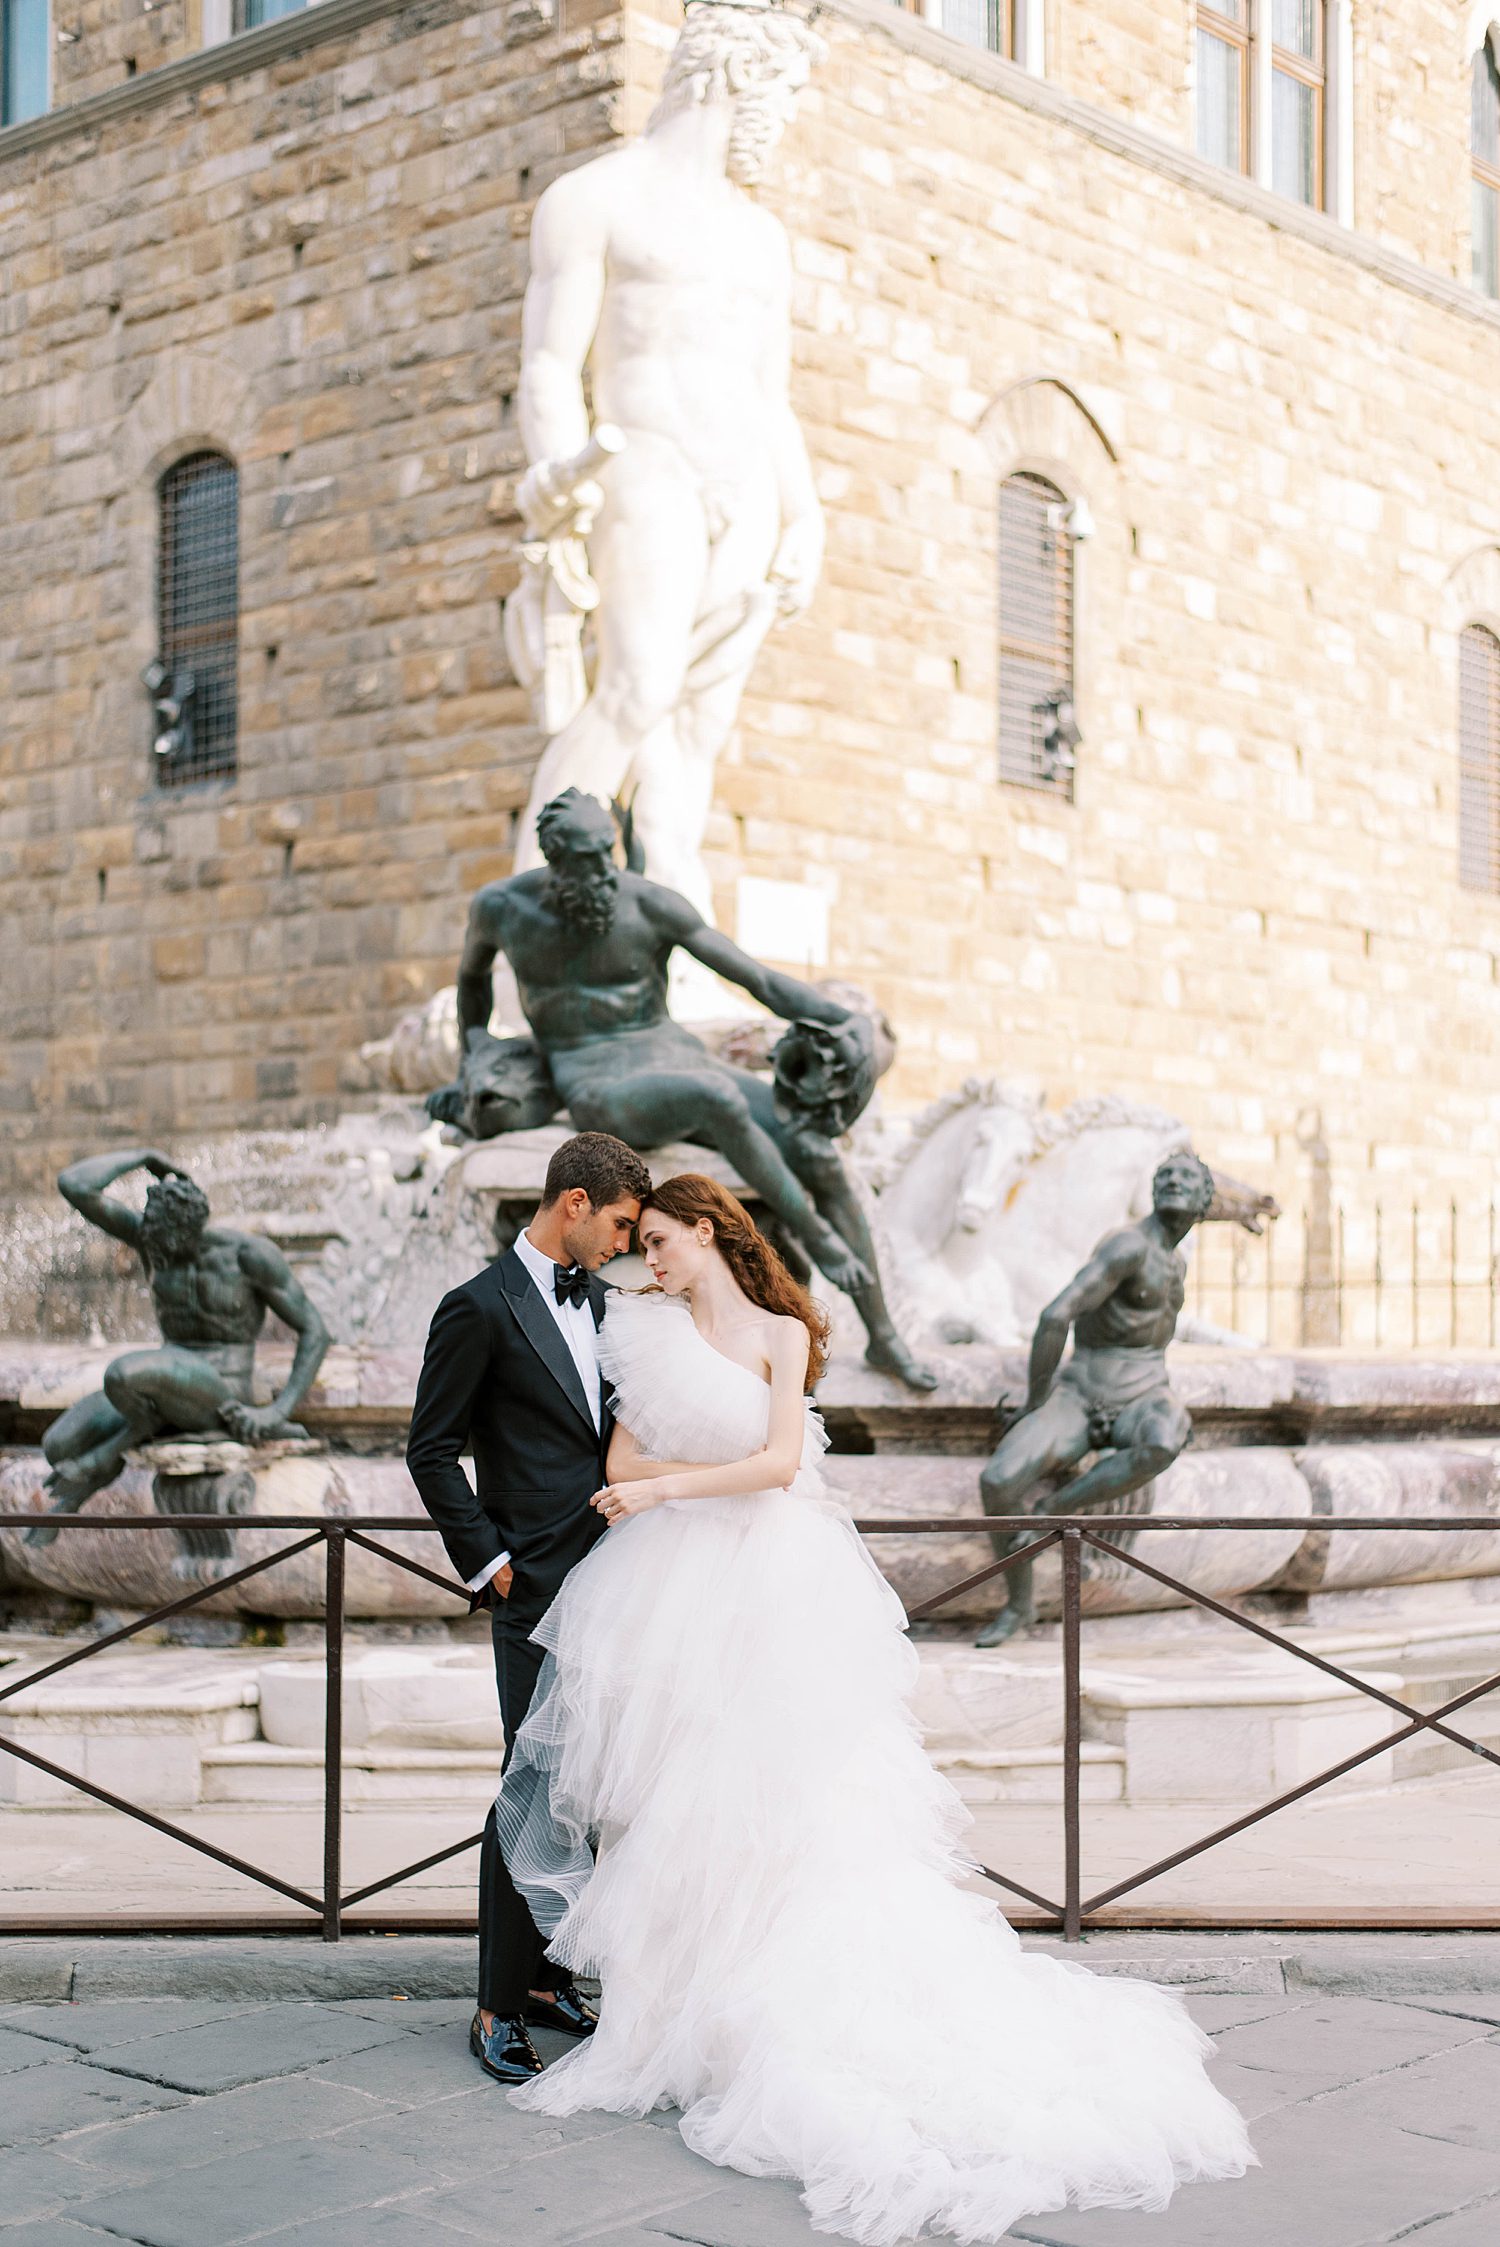 Florence Italy wedding photographer photographs couple by classic statue 